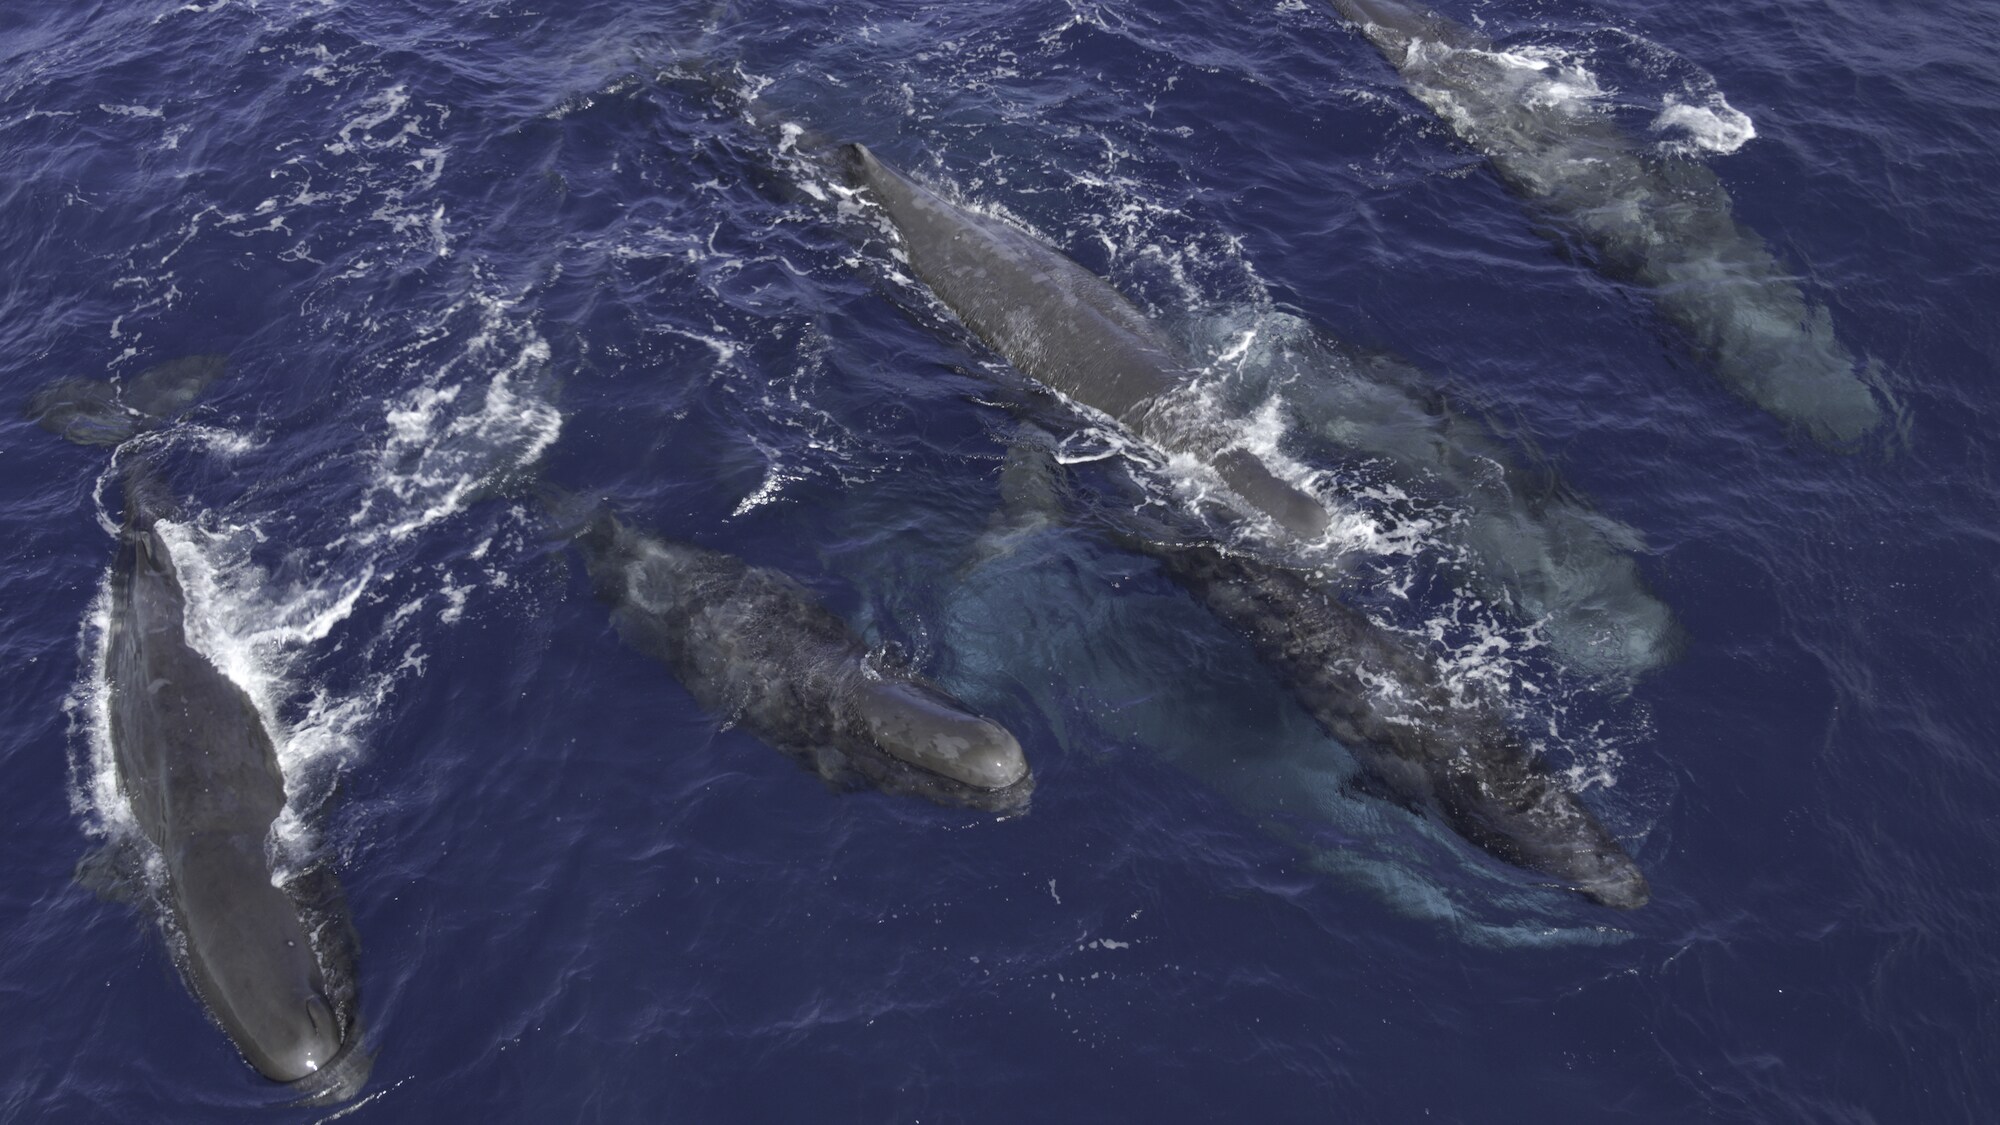 Many sperm whales are wandering nomads. They travel freely across vast stretches of ocean and stop to interact with local whales. (National Geographic for Disney+/Hayes Baxley)